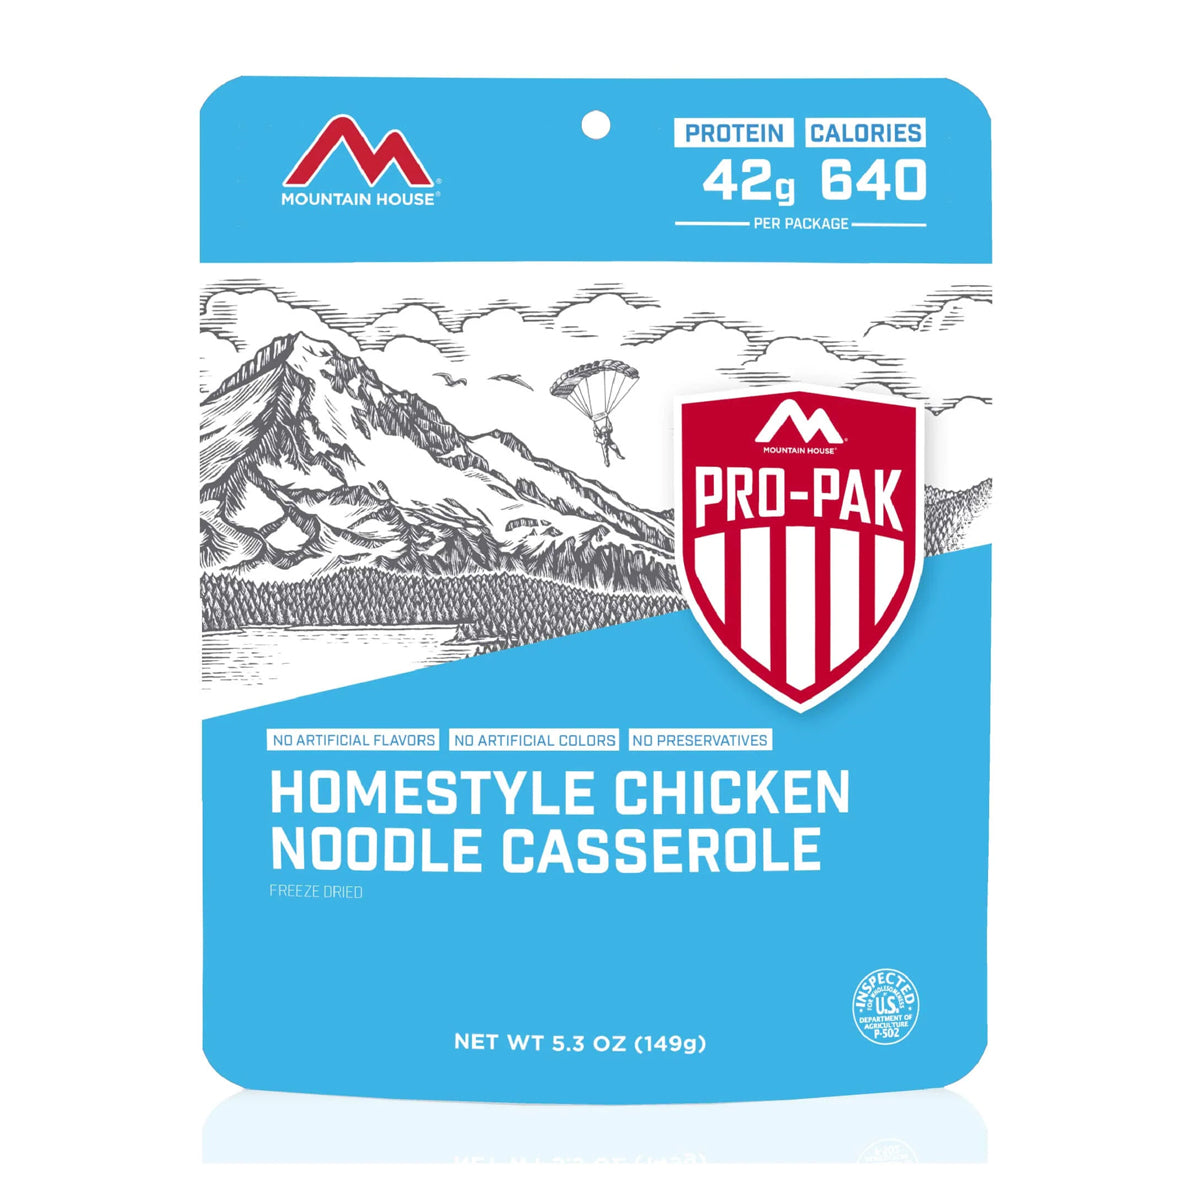 Mountain House Homestyle Chicken & Noodle Pro-Pak in  by GOHUNT | Mountain House - GOHUNT Shop